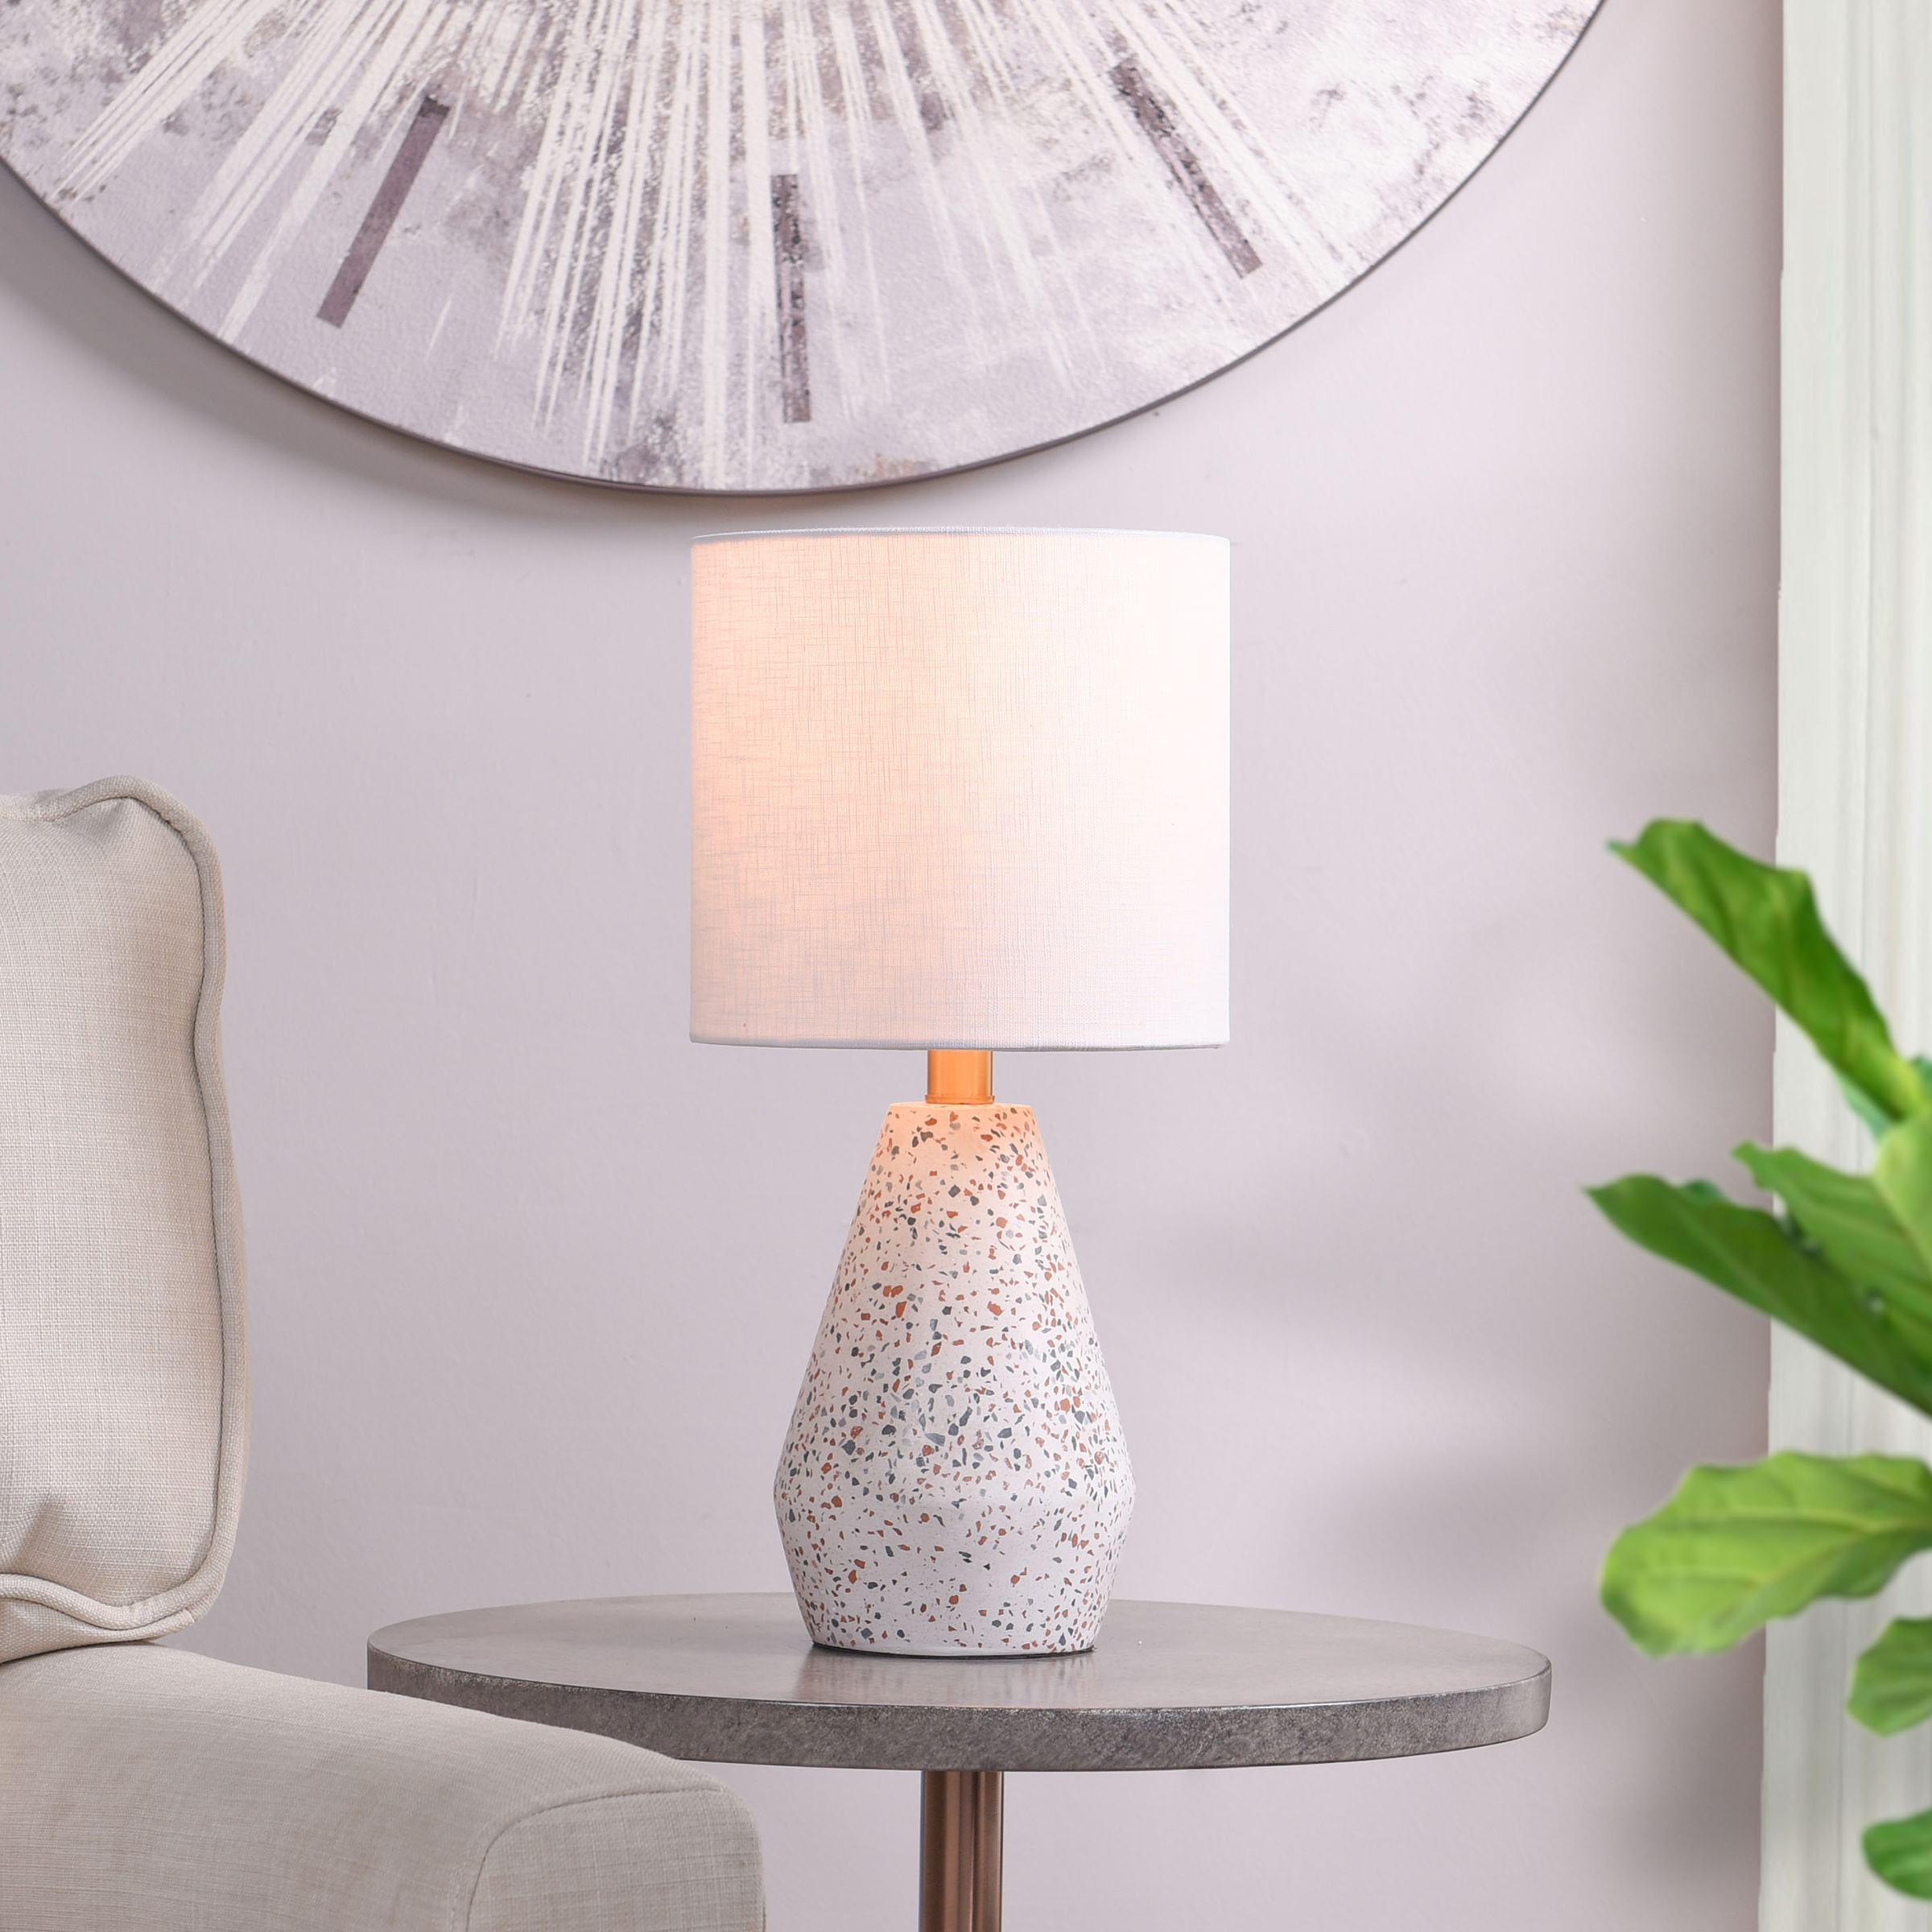 Mainstays Terrazzo Table Lamp with White Drum Shade, 8"W x 16.75"H - image 5 of 15